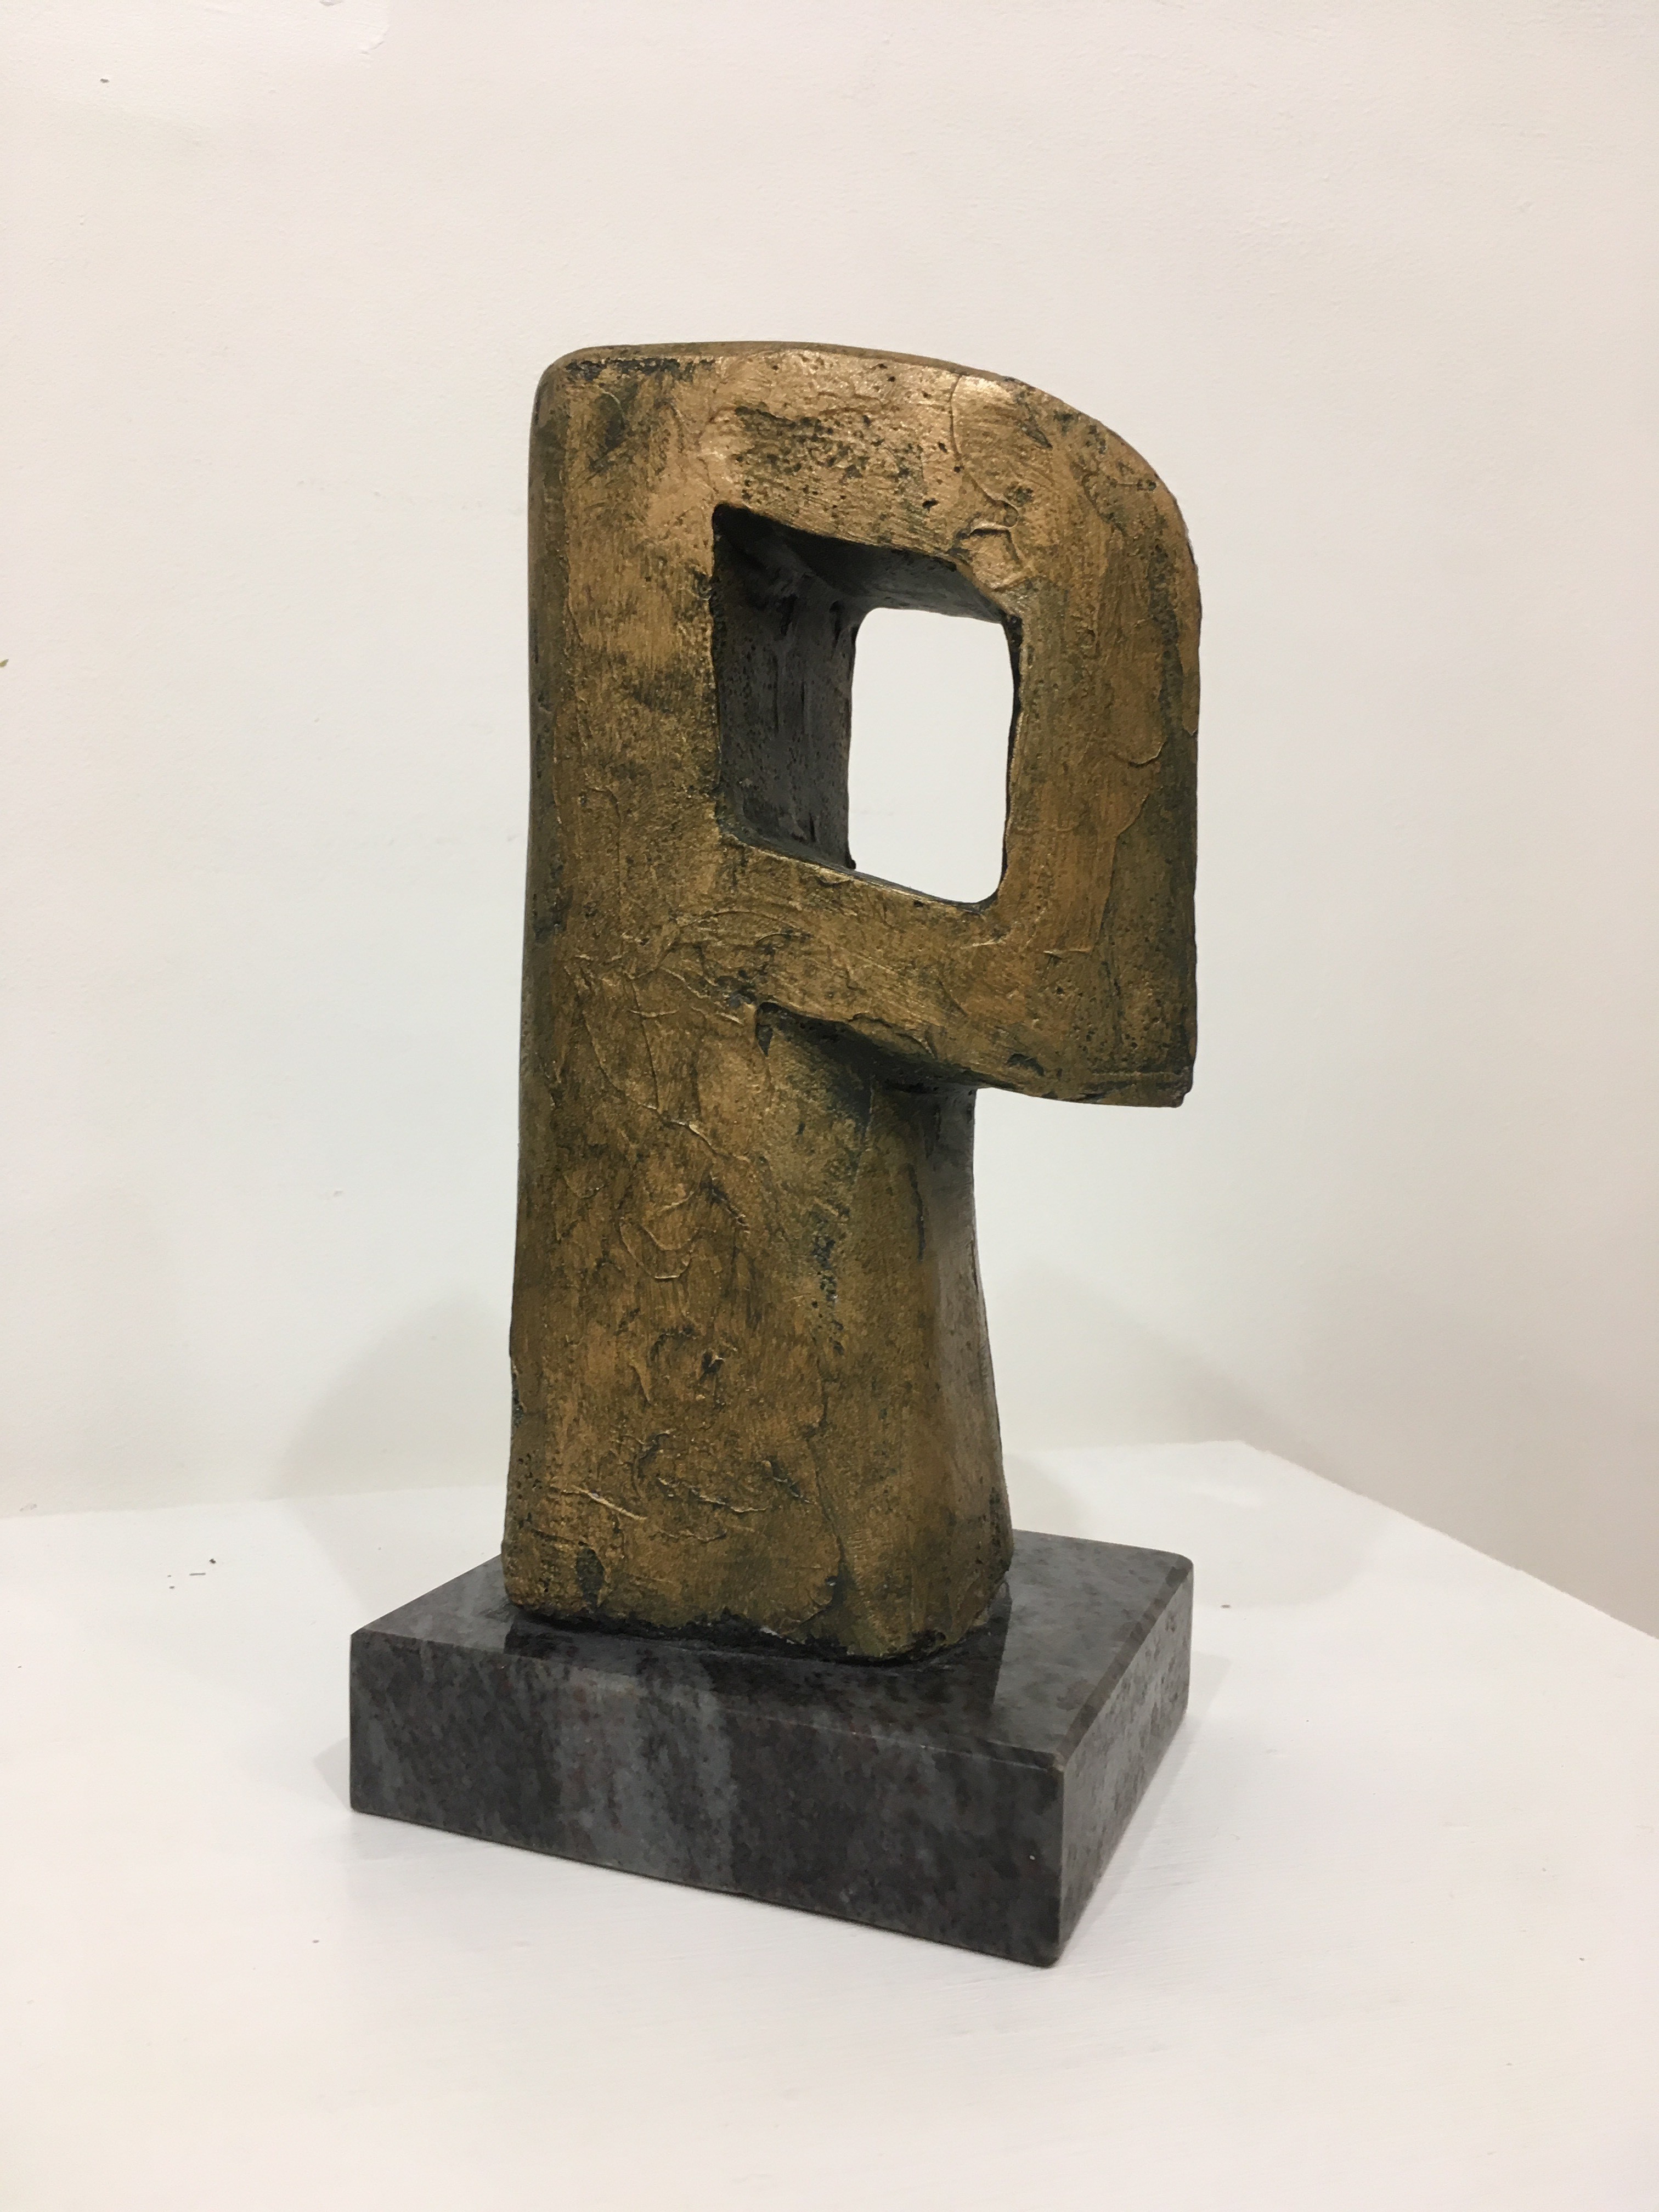 'Sentinel - Bronze Carving with Granite Base' by artist Tom Allan